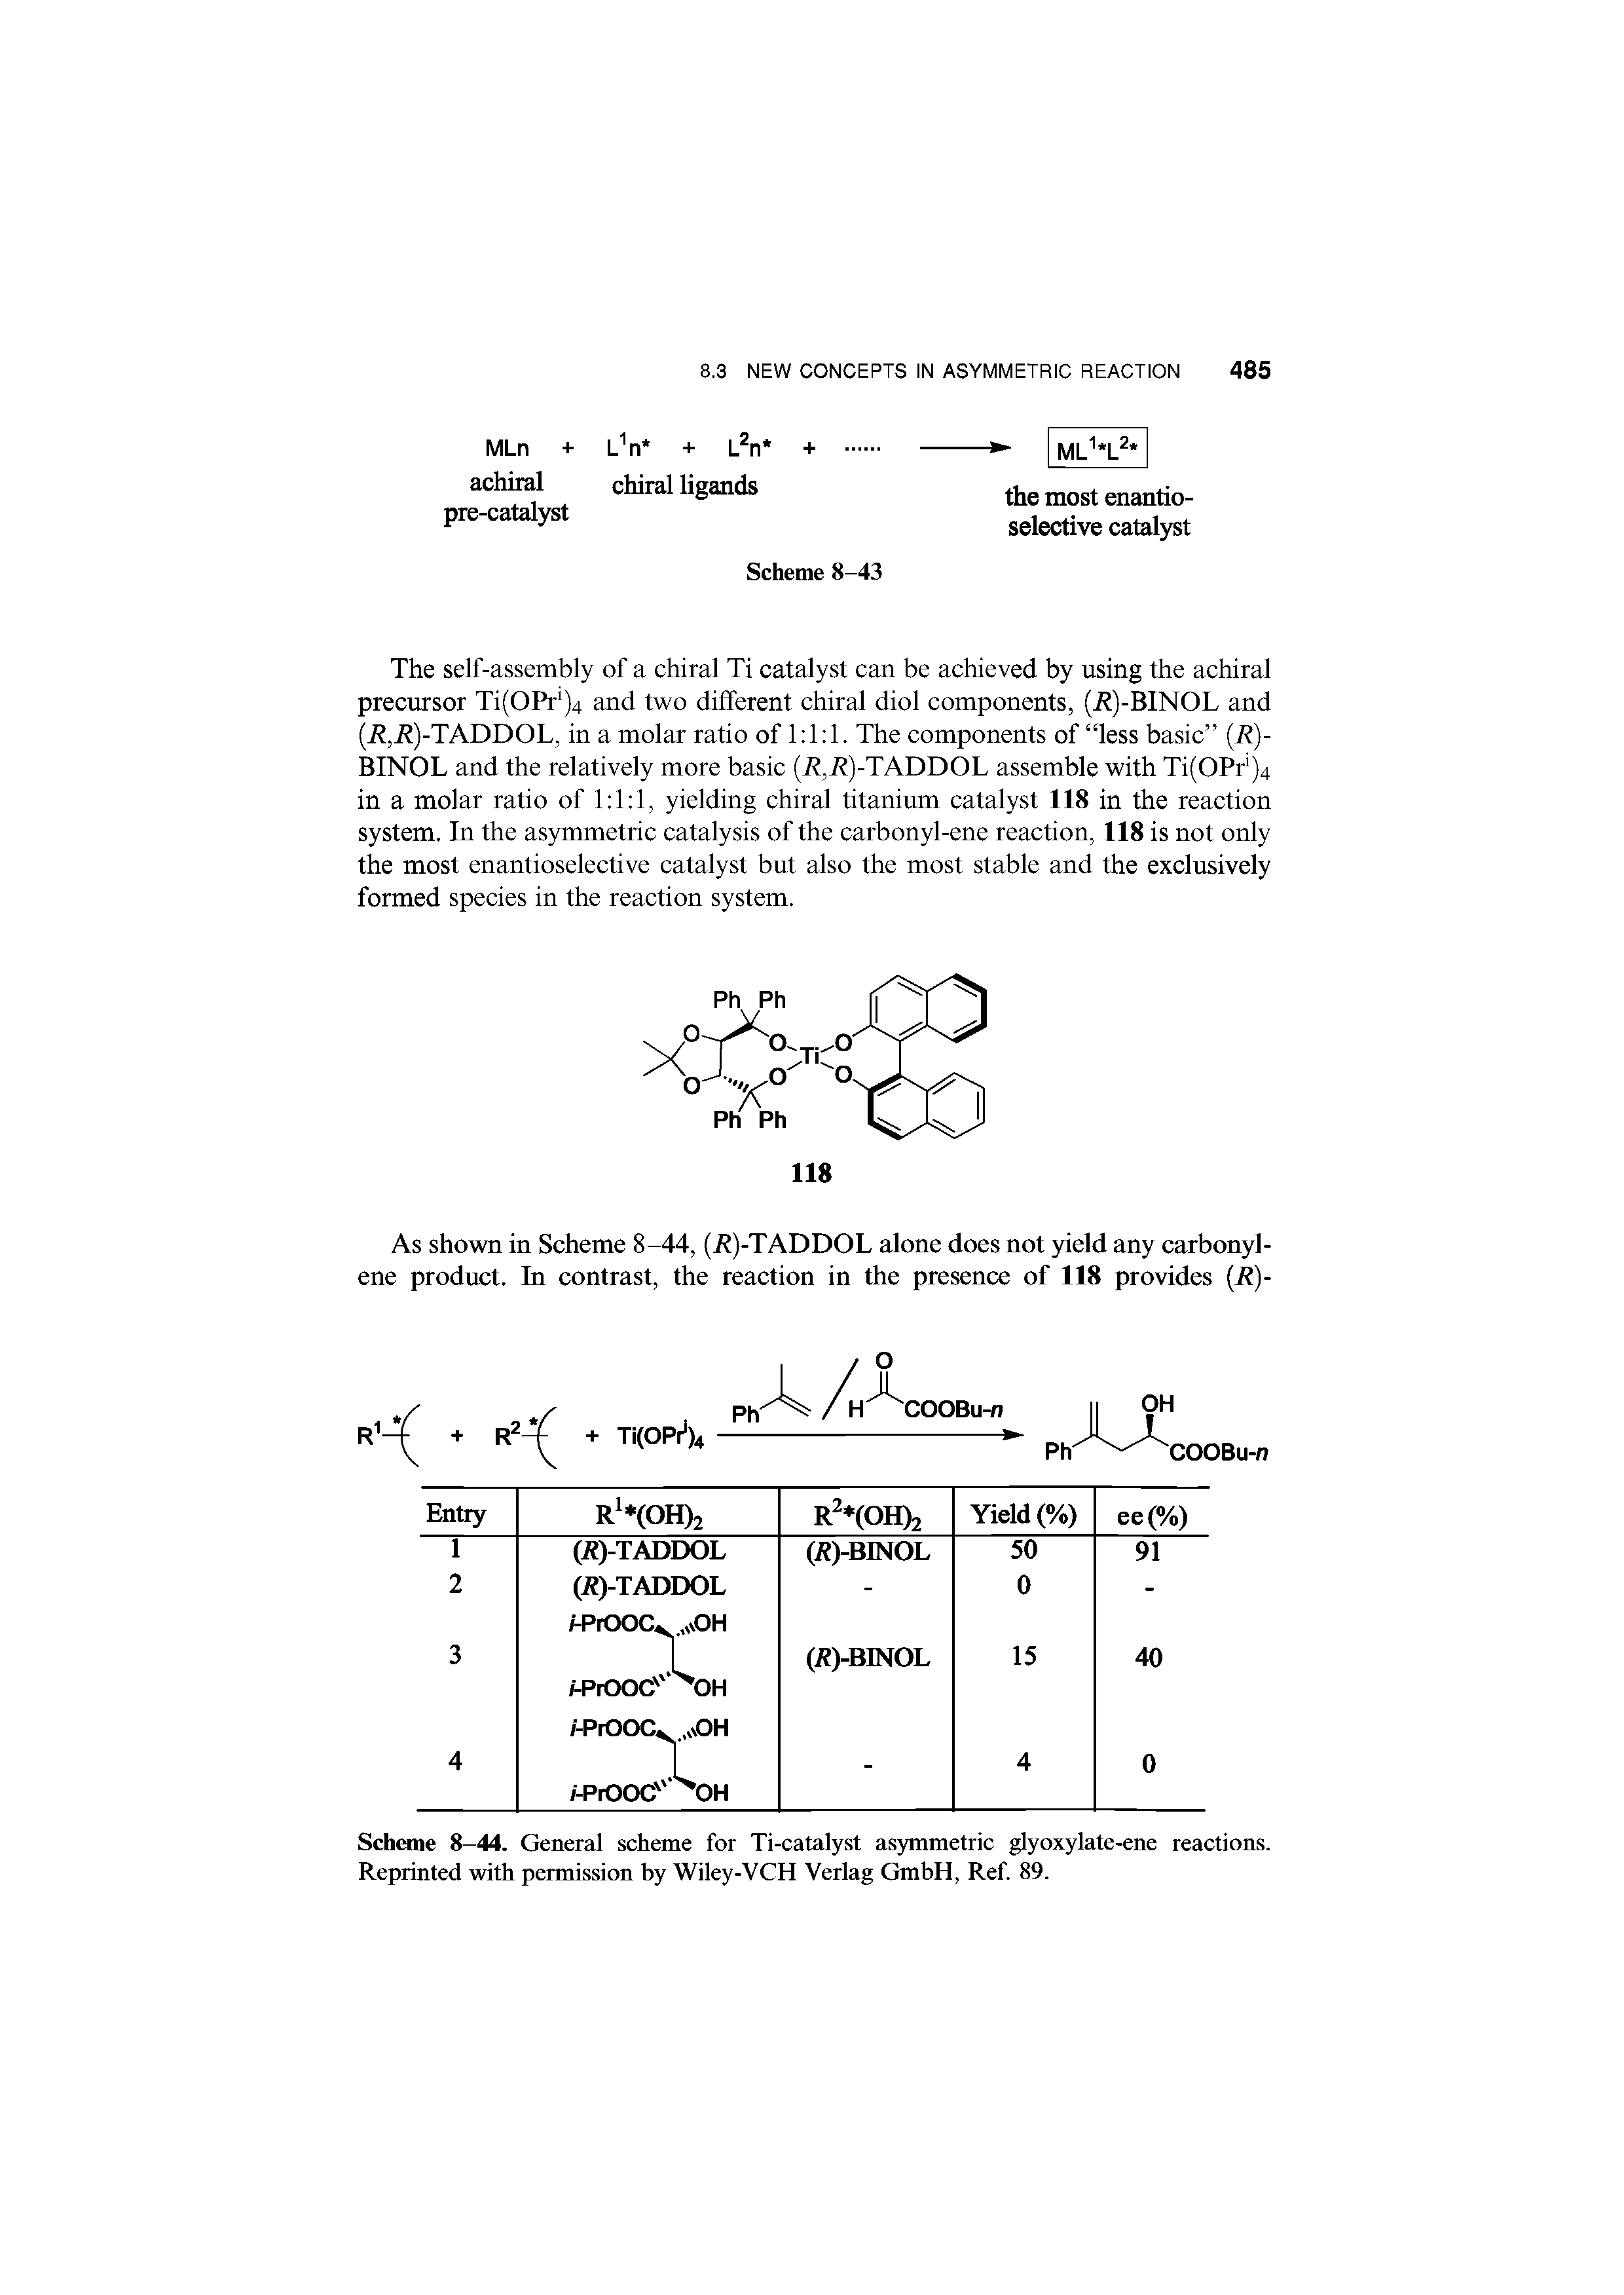 Scheme 8-44. General scheme for Ti-catalyst asymmetric glyoxylate-ene reactions. Reprinted with permission by Wiley-VCH Verlag GmbH, Ref. 89.